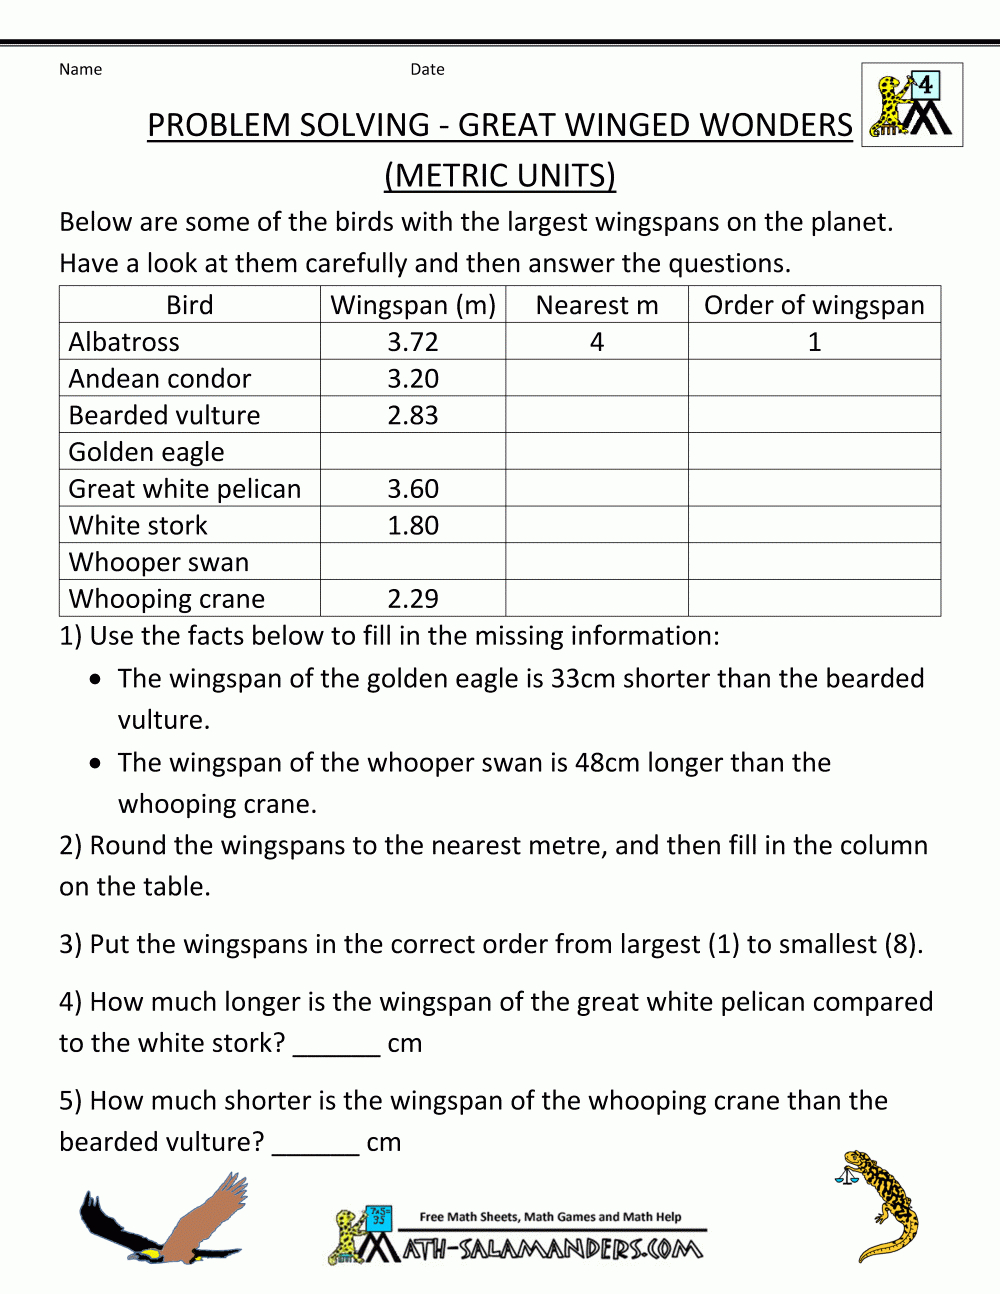 rounding-word-problems-worksheets-db-excel